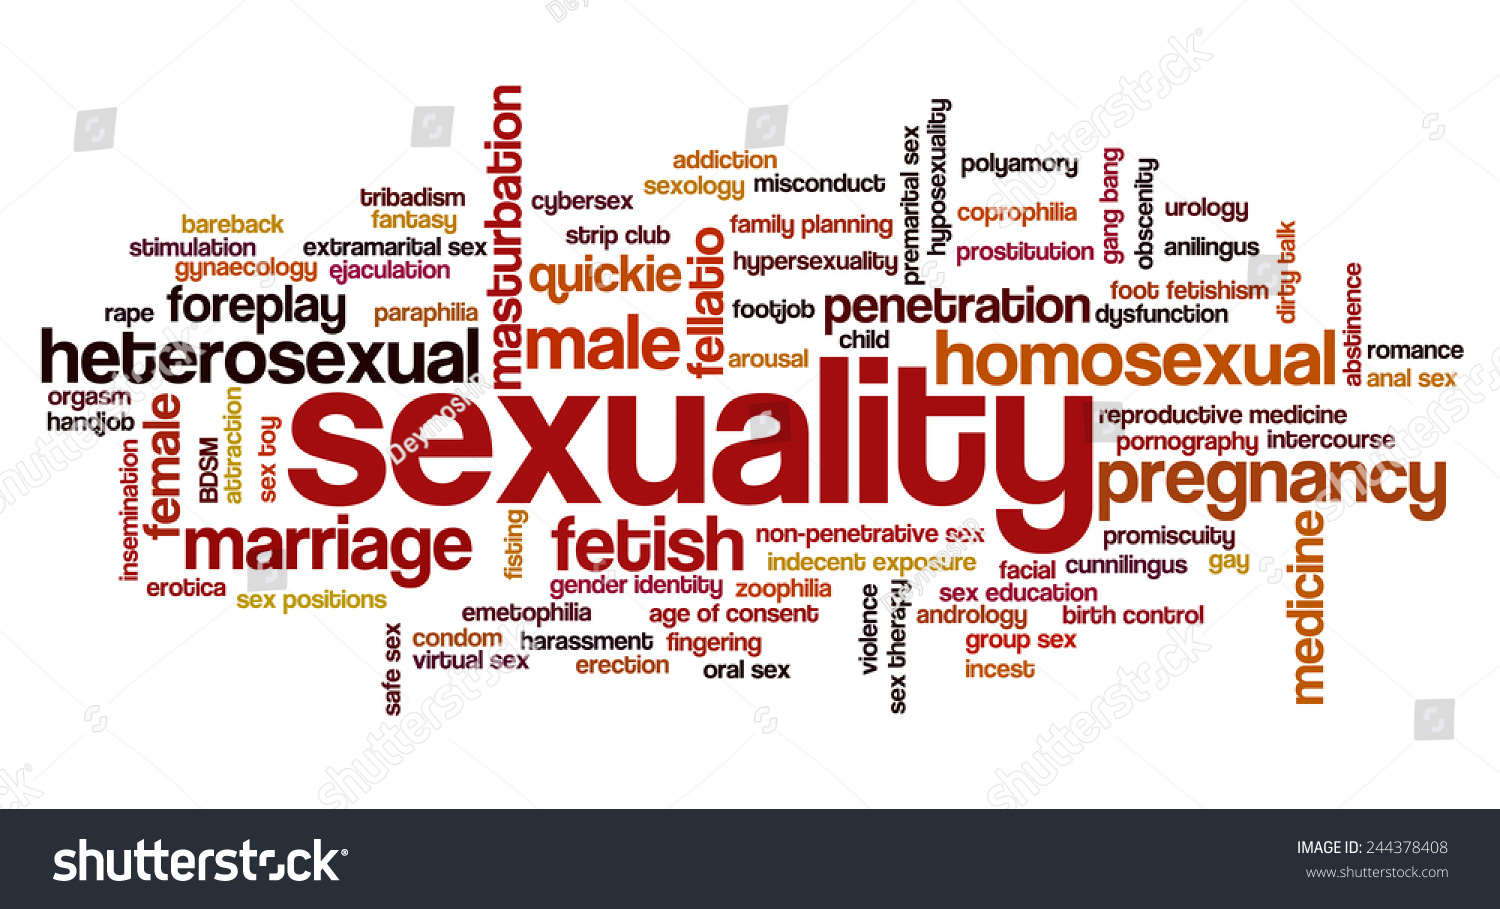 Word Cloud Illustrating Words Related To Human Sexuality Stock Vector Illustration 244378408